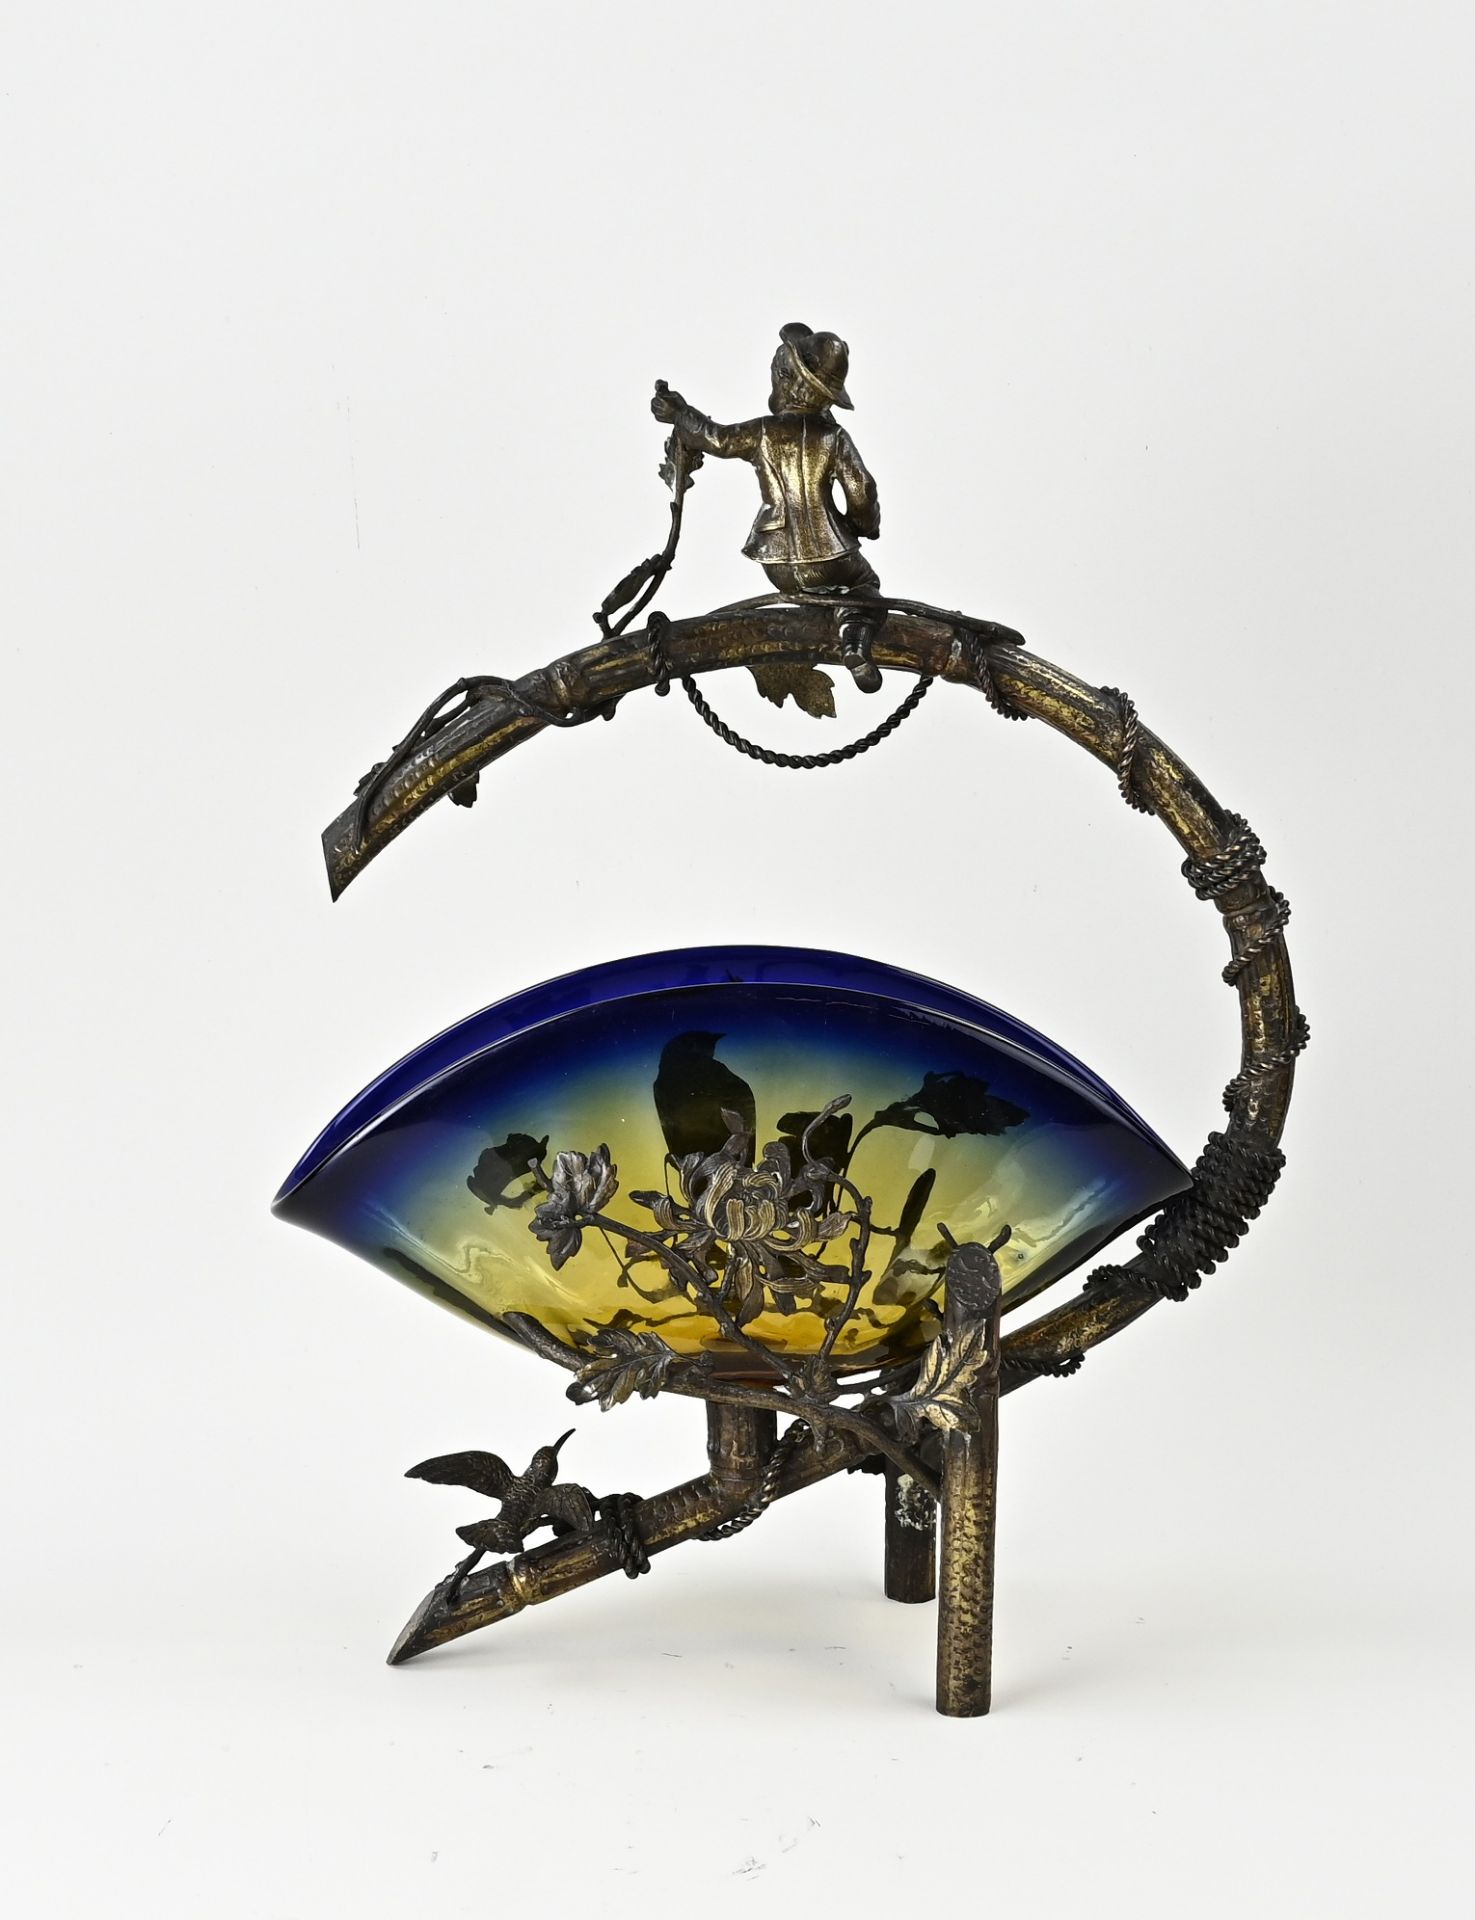 Antique table bowl with glass, 1910 - Image 2 of 2